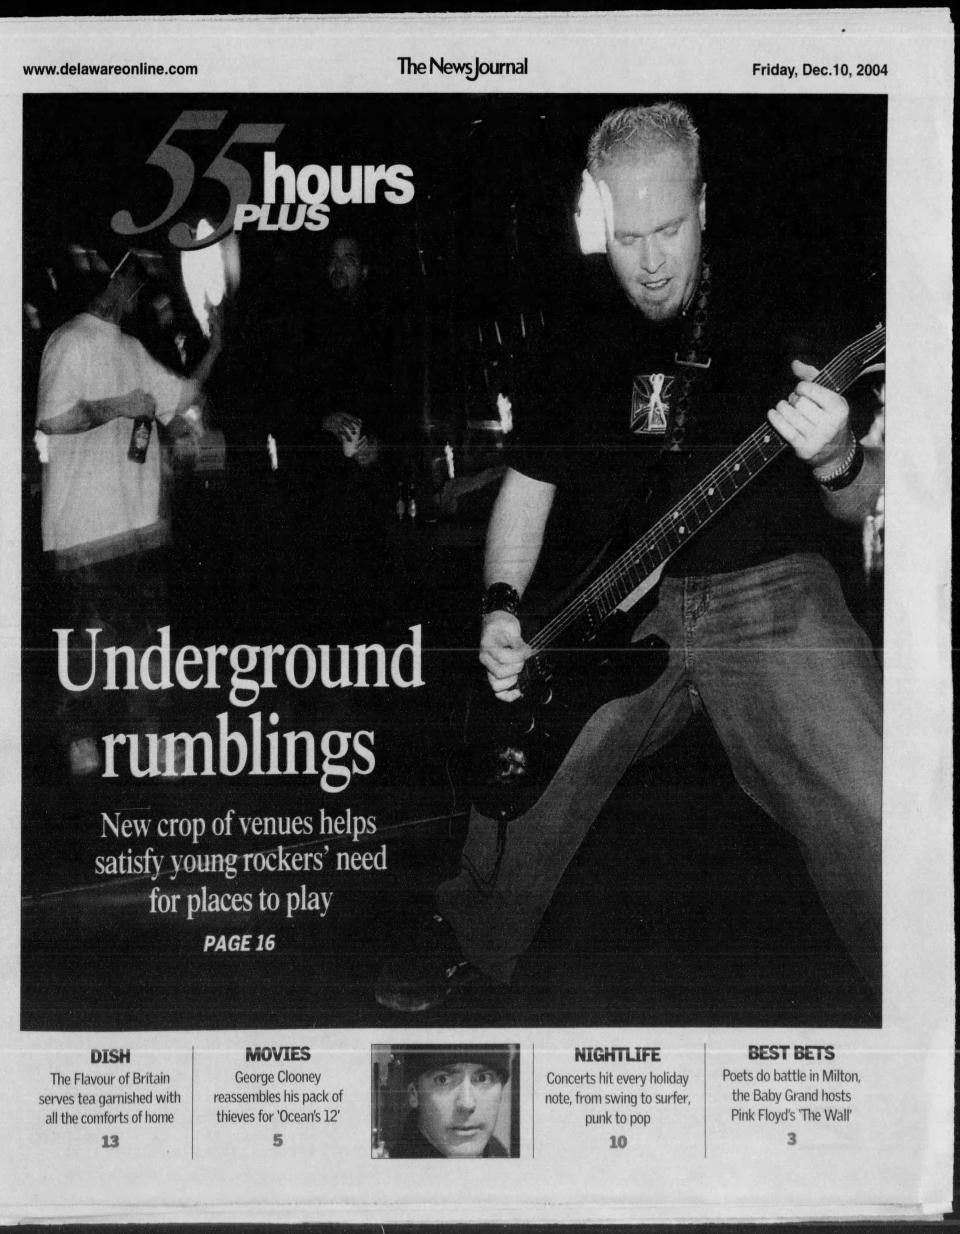 The News Journal's 2004 cover story about The Spazzatorium, a short-lived Newark underground music venue.